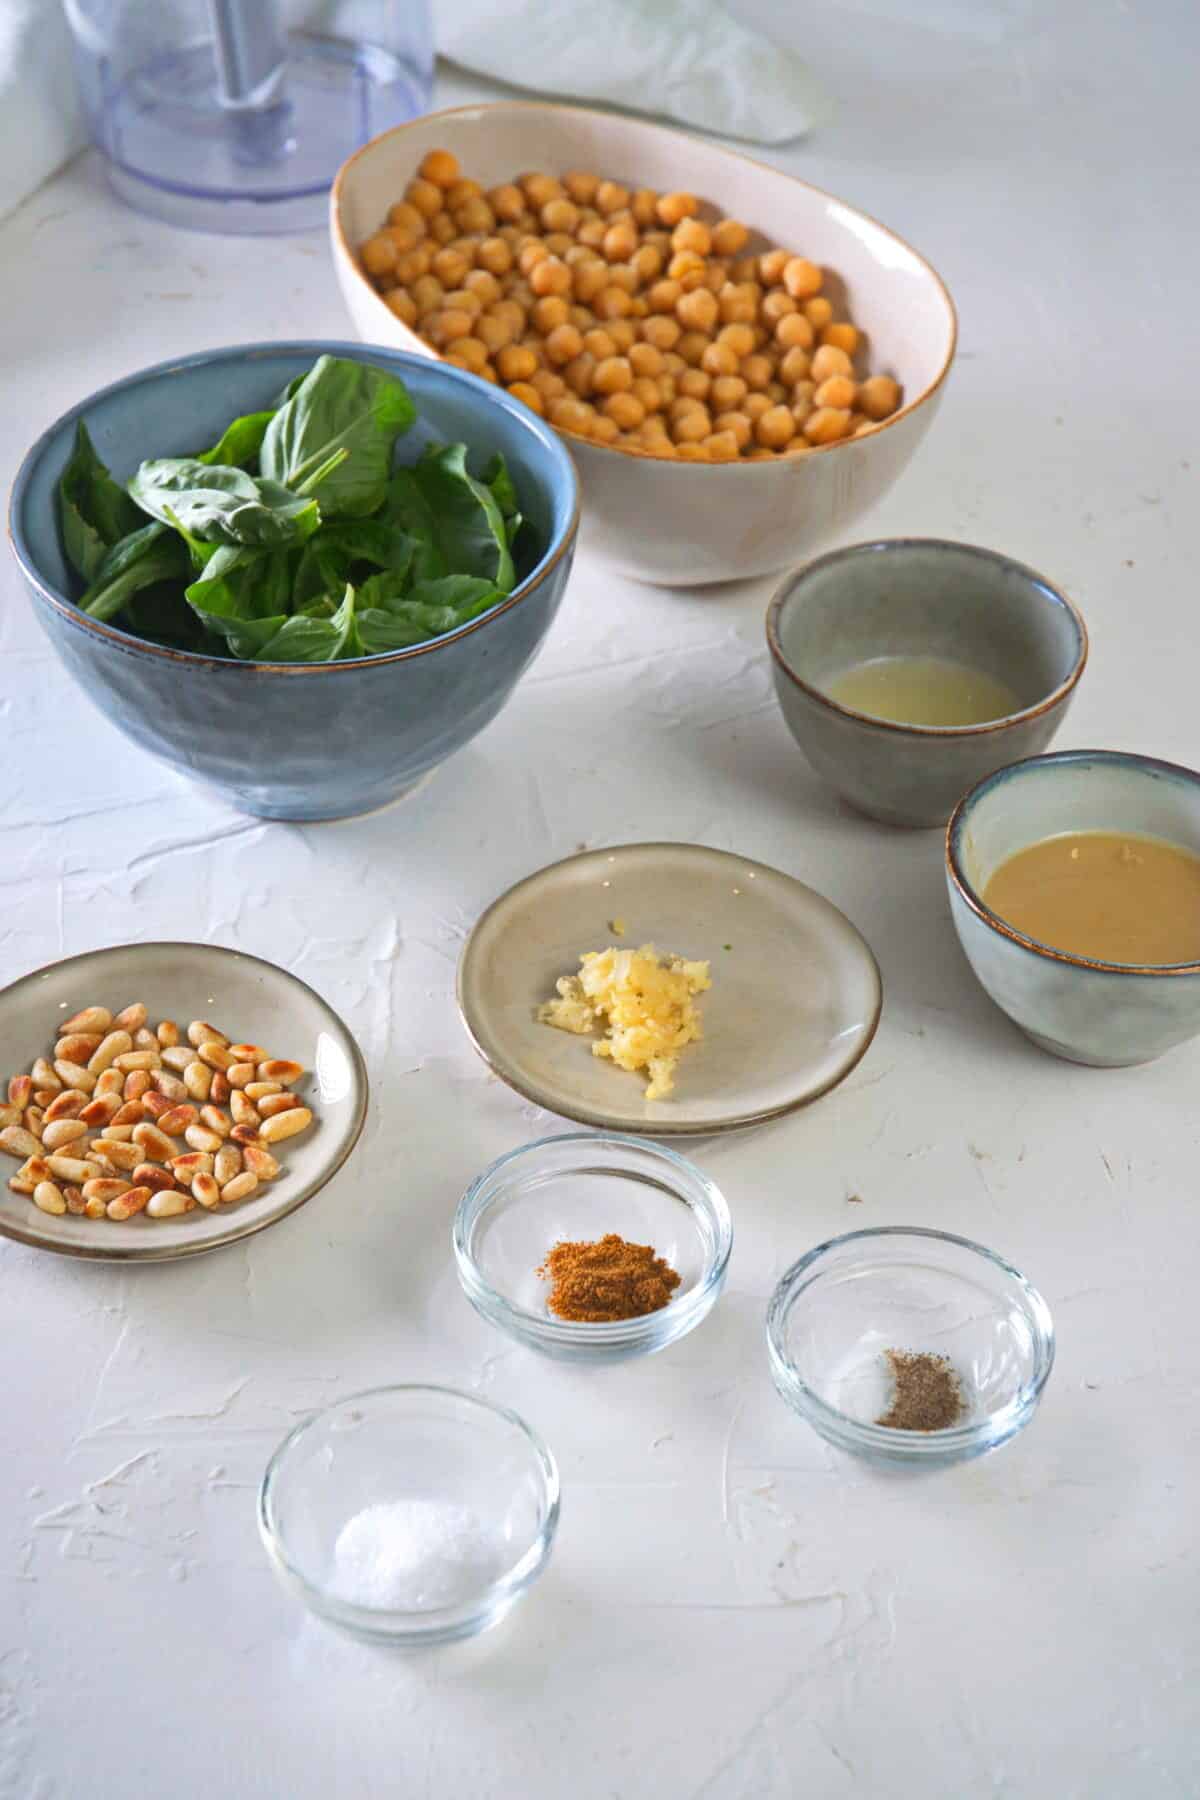 Basil hummus ingredients prepped in bowls on white concrete-look background.